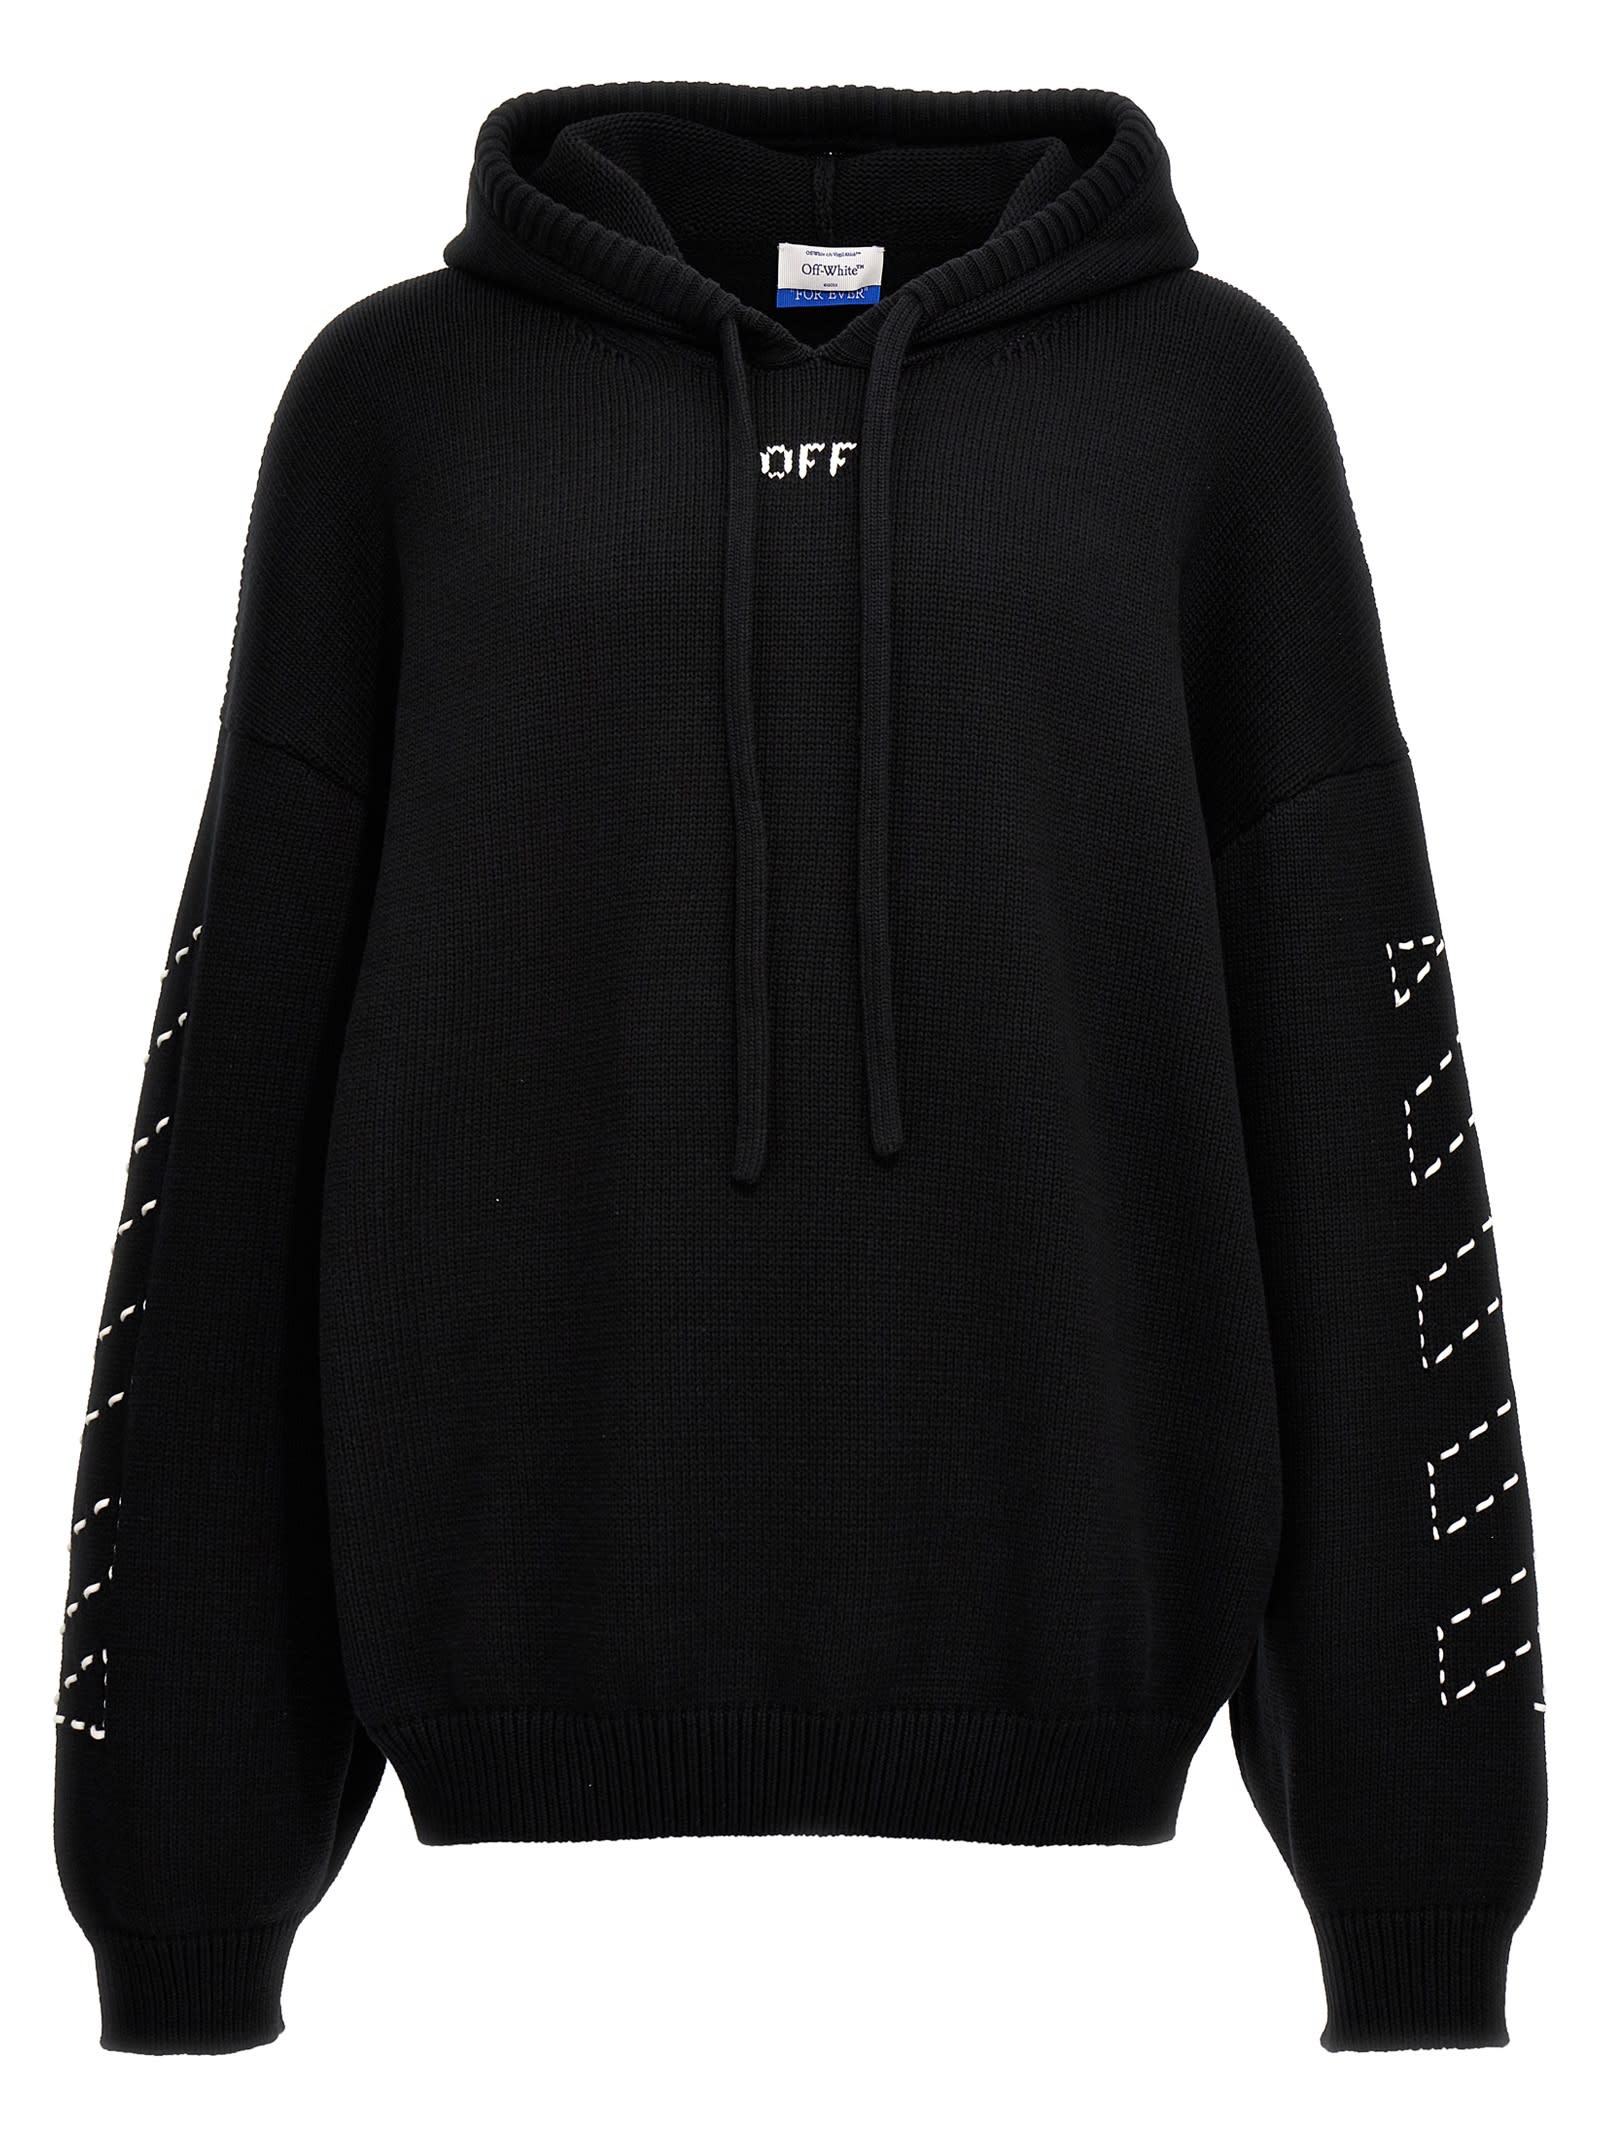 OFF-WHITE STITCH ARR DIAGS HOODED SWEATER